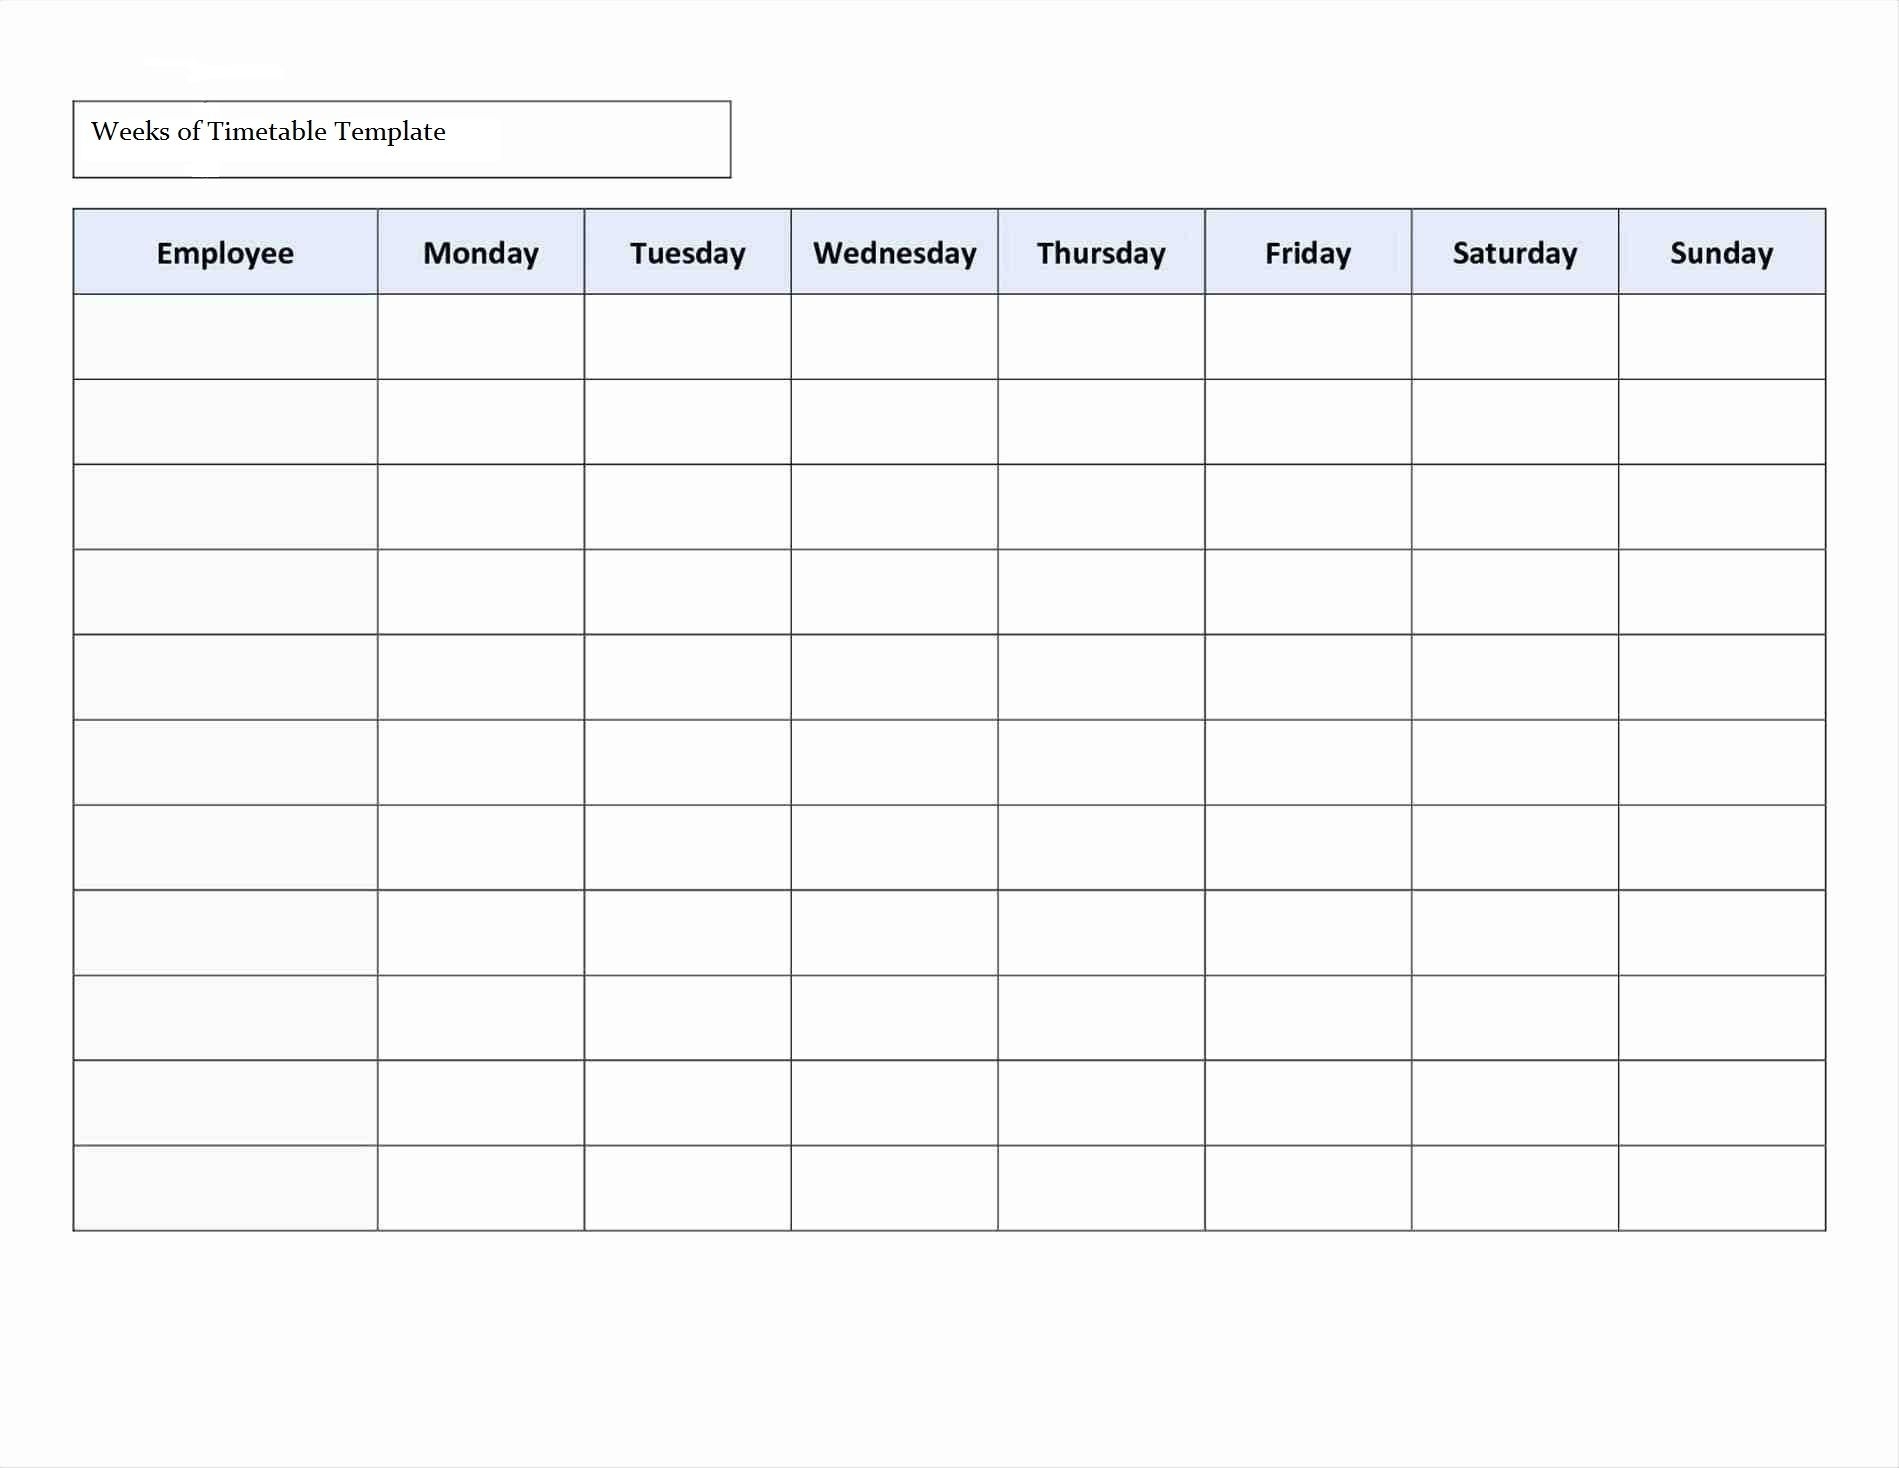 Timetable Template #dailytimetabletemplate | Daily Schedule for Monday To Friday Timetable Excel